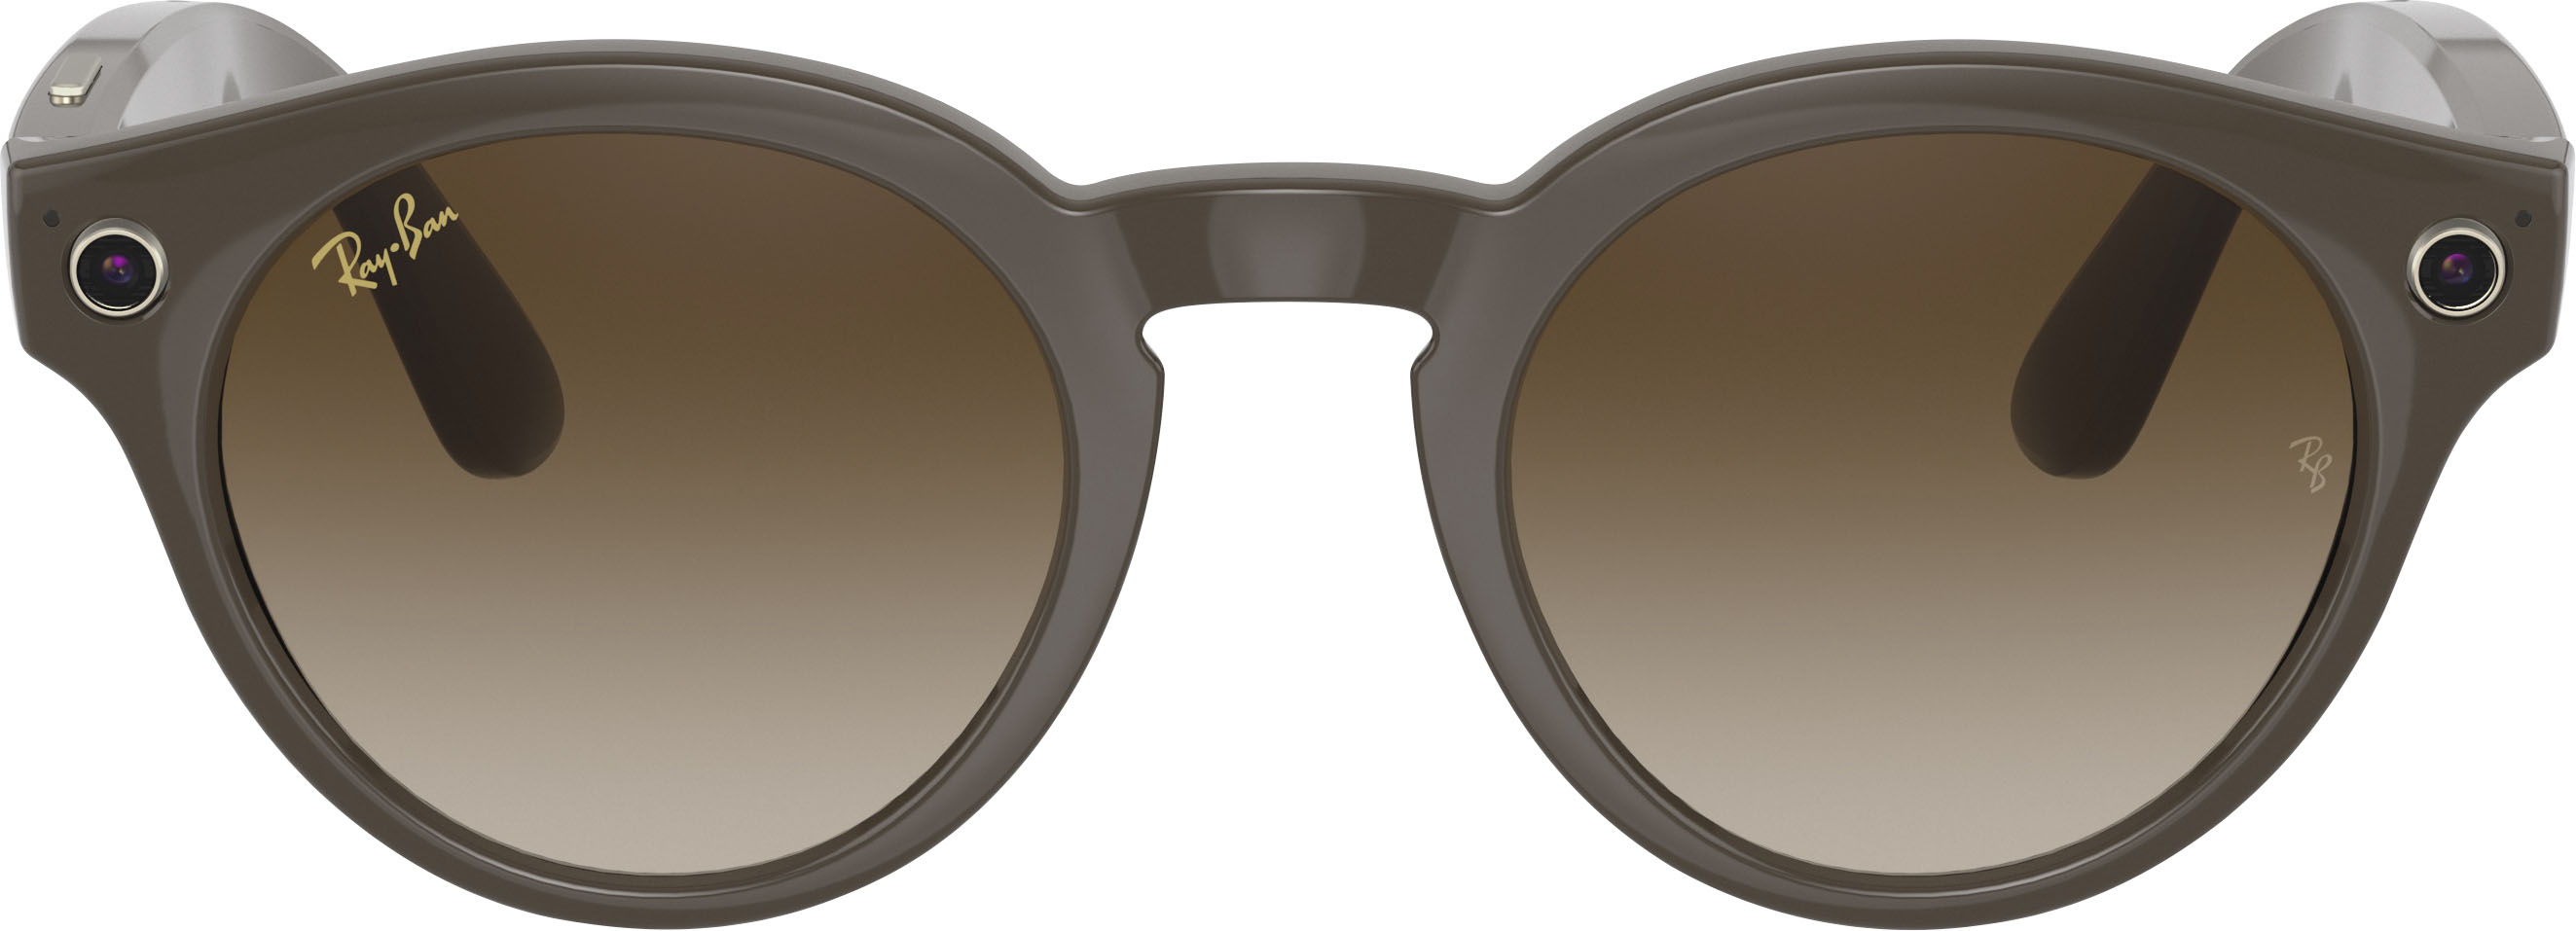 Zoom In On Angle Zoom. Ray-Ban - Stories Round Smart Glasses - Shiny Brown/Brown Gradient.